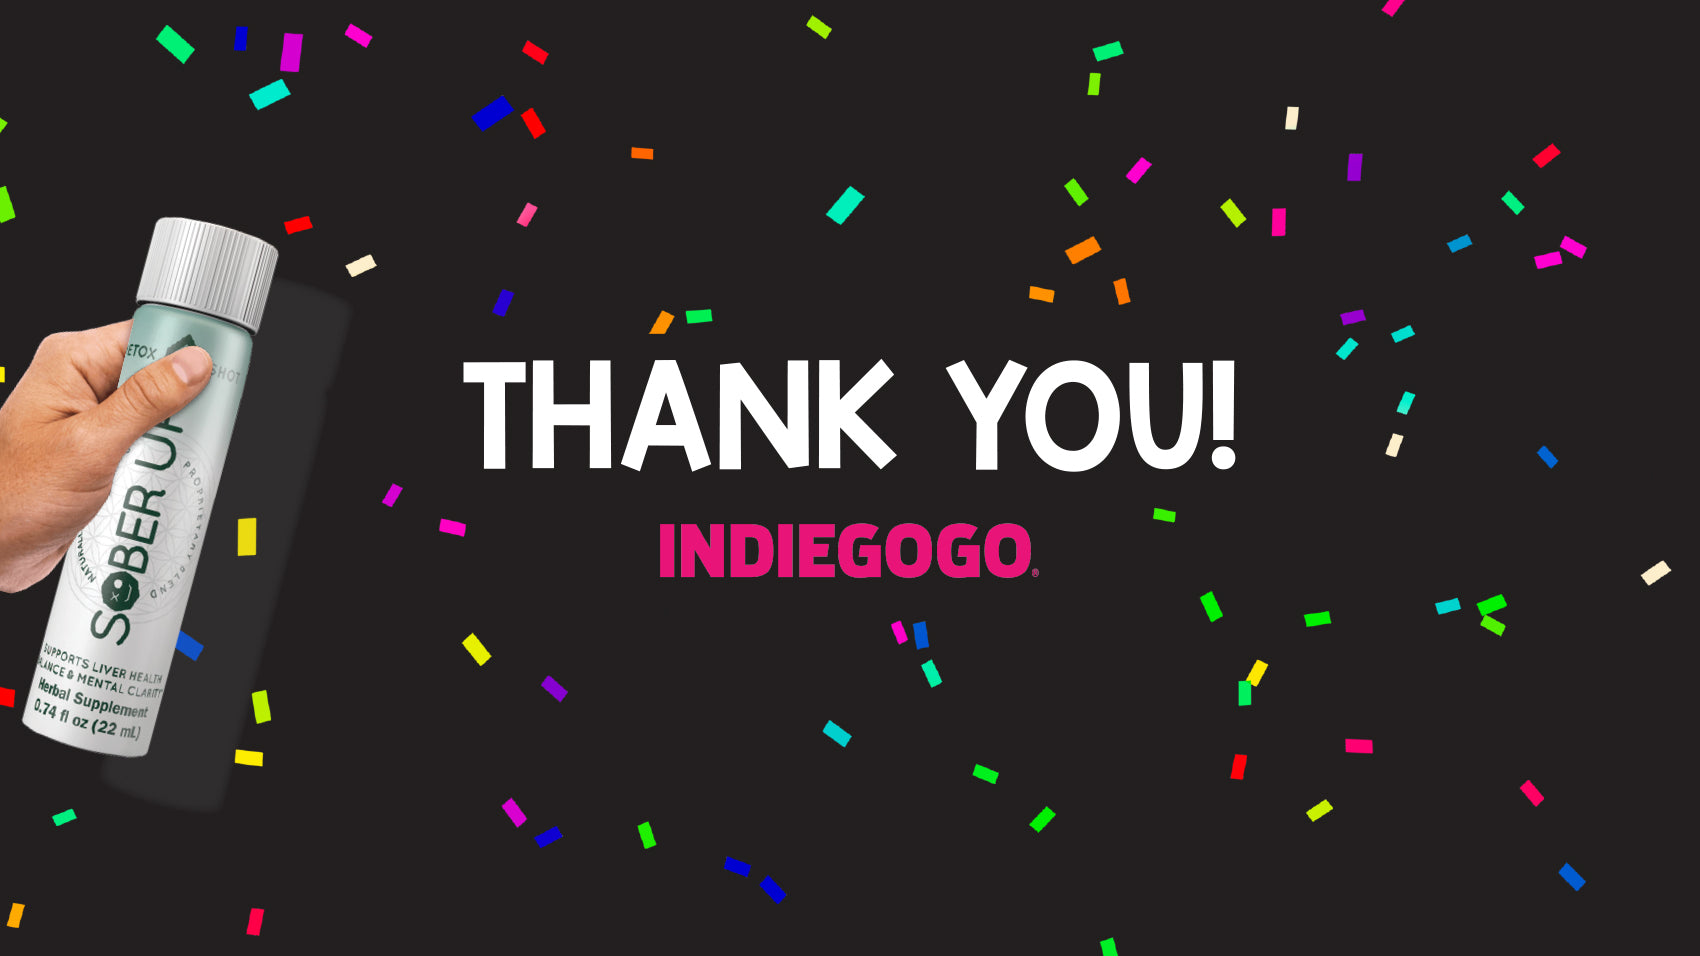 Thank you: Indiegogo ends and our next chapter begins